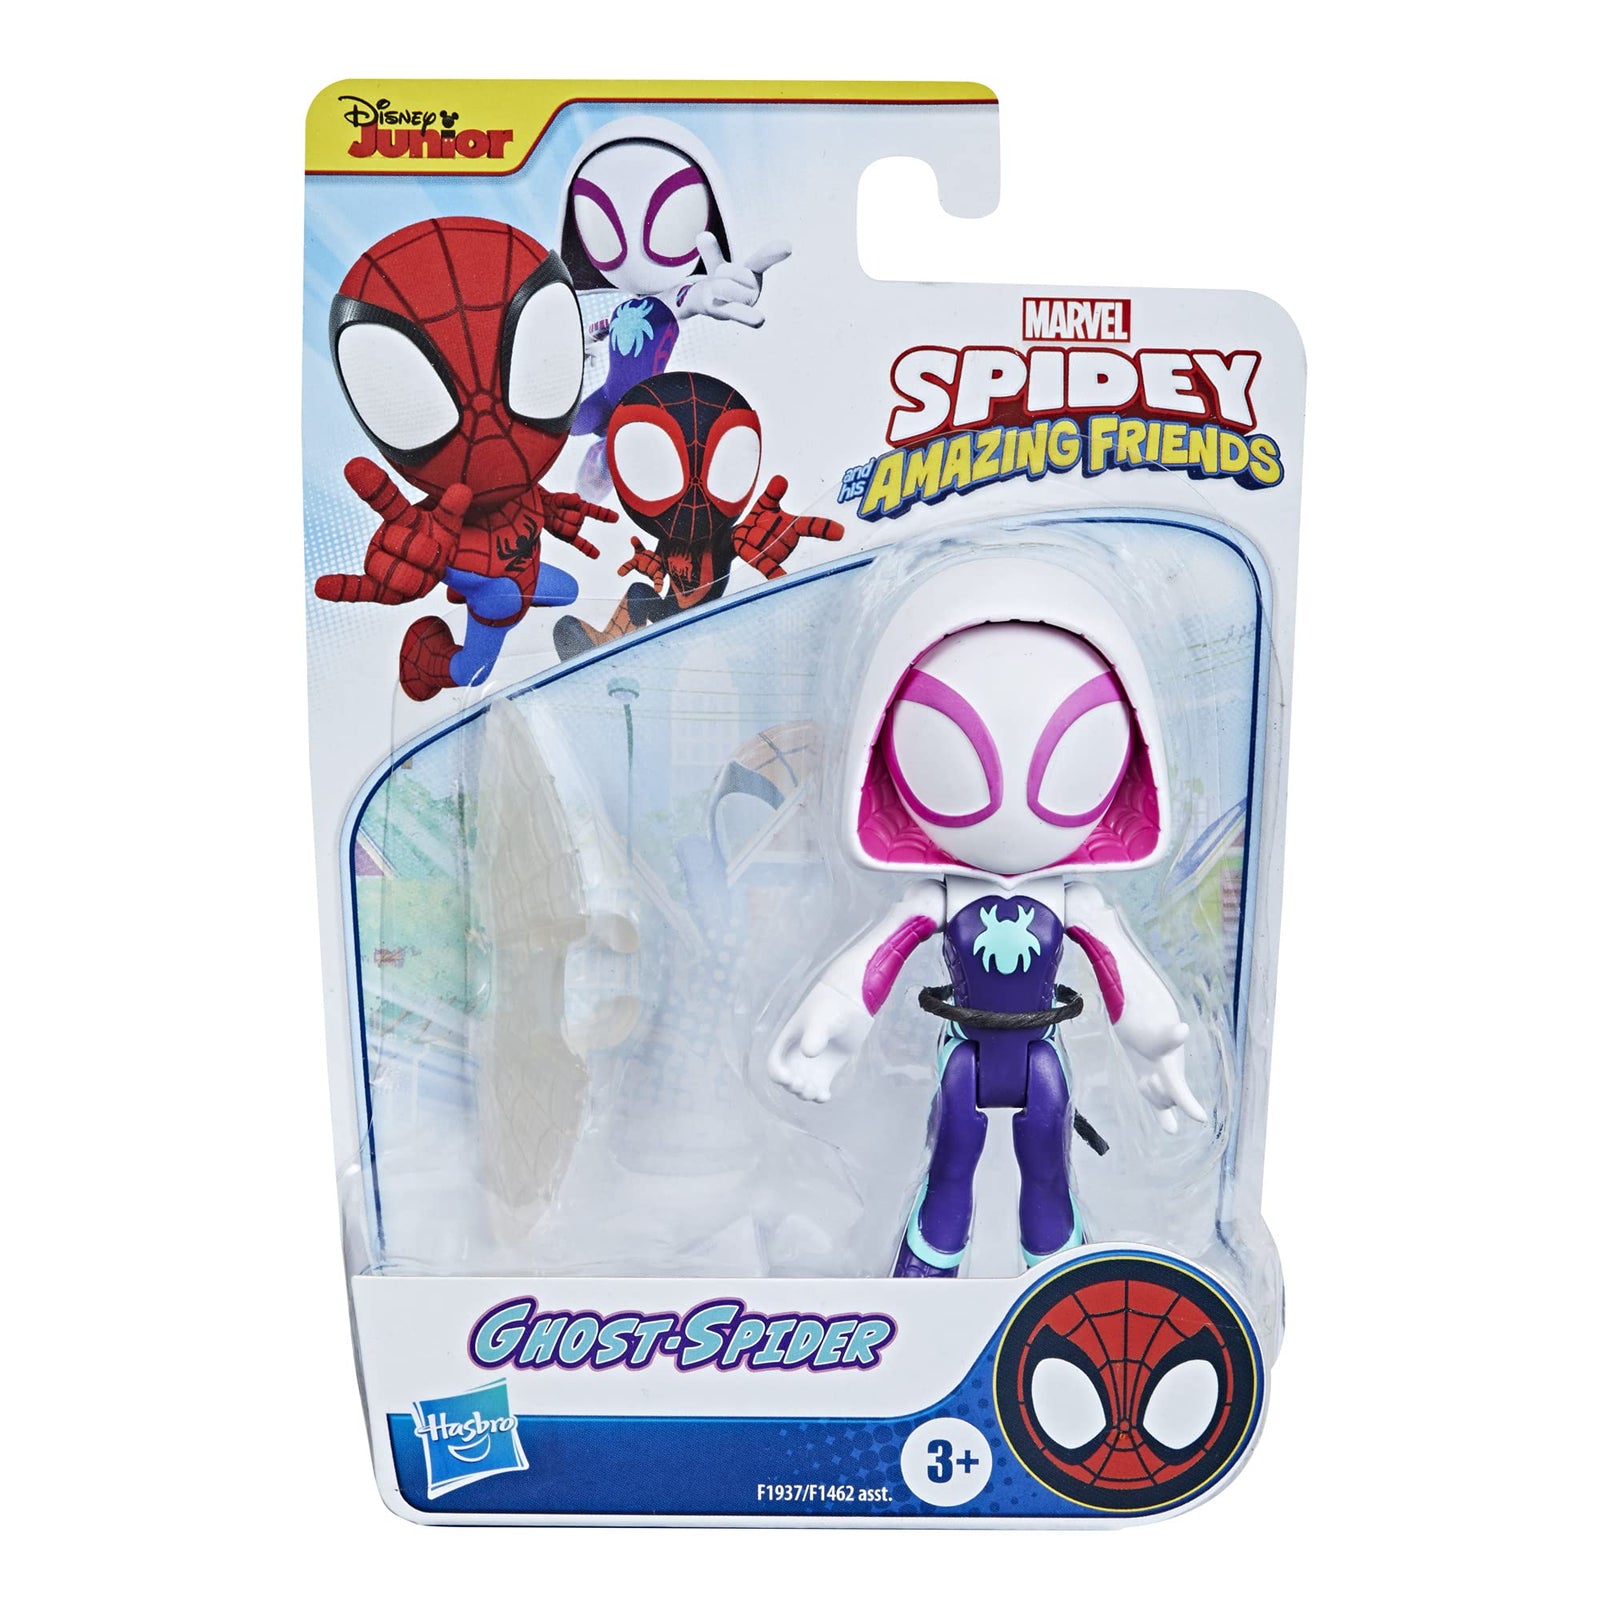 Marvel Spidey and His Amazing Friends Ghost-Spider Hero Figure, 4-Inch Scale Action Figure, Includes 1 Accessory, for Kids Ages 3 and Up